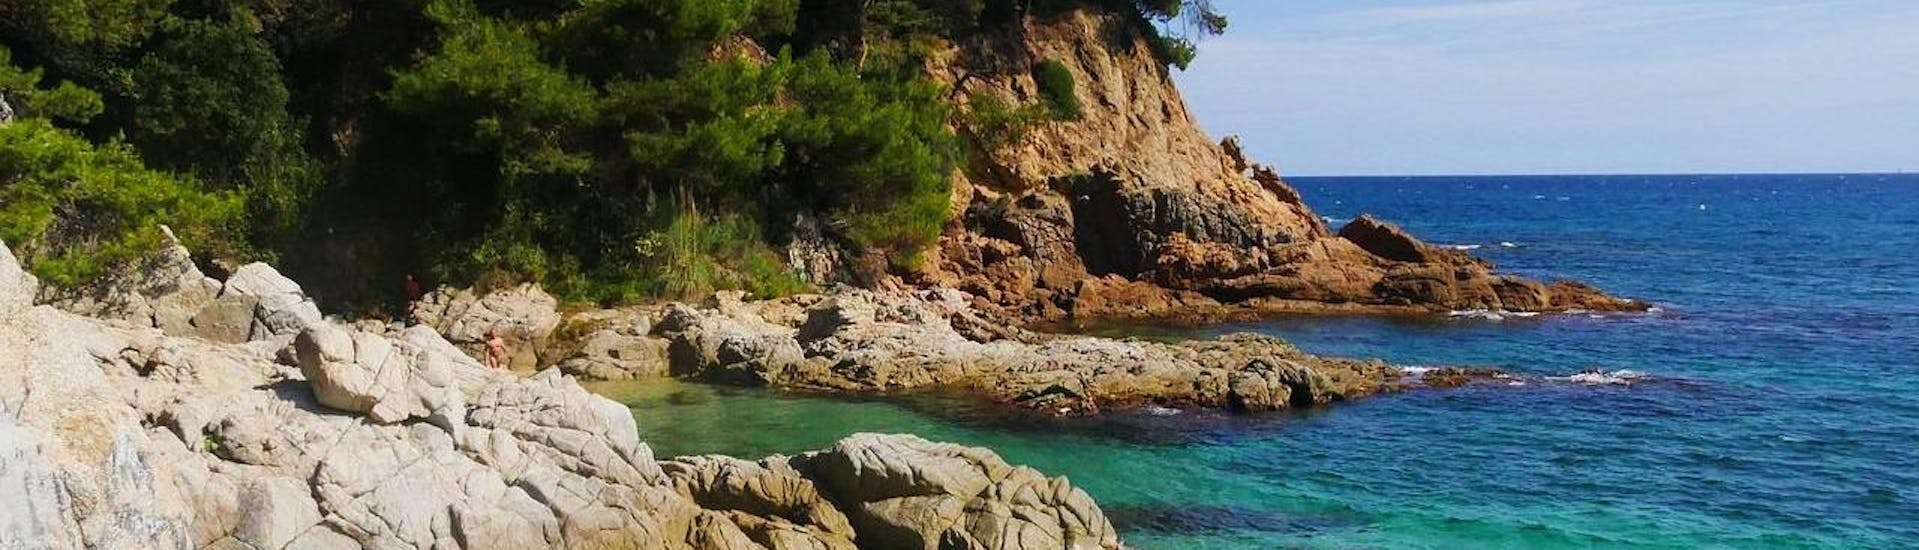 Beautiful photo of a Costa Brava beach that can be visited with one of Lassdive's activities.